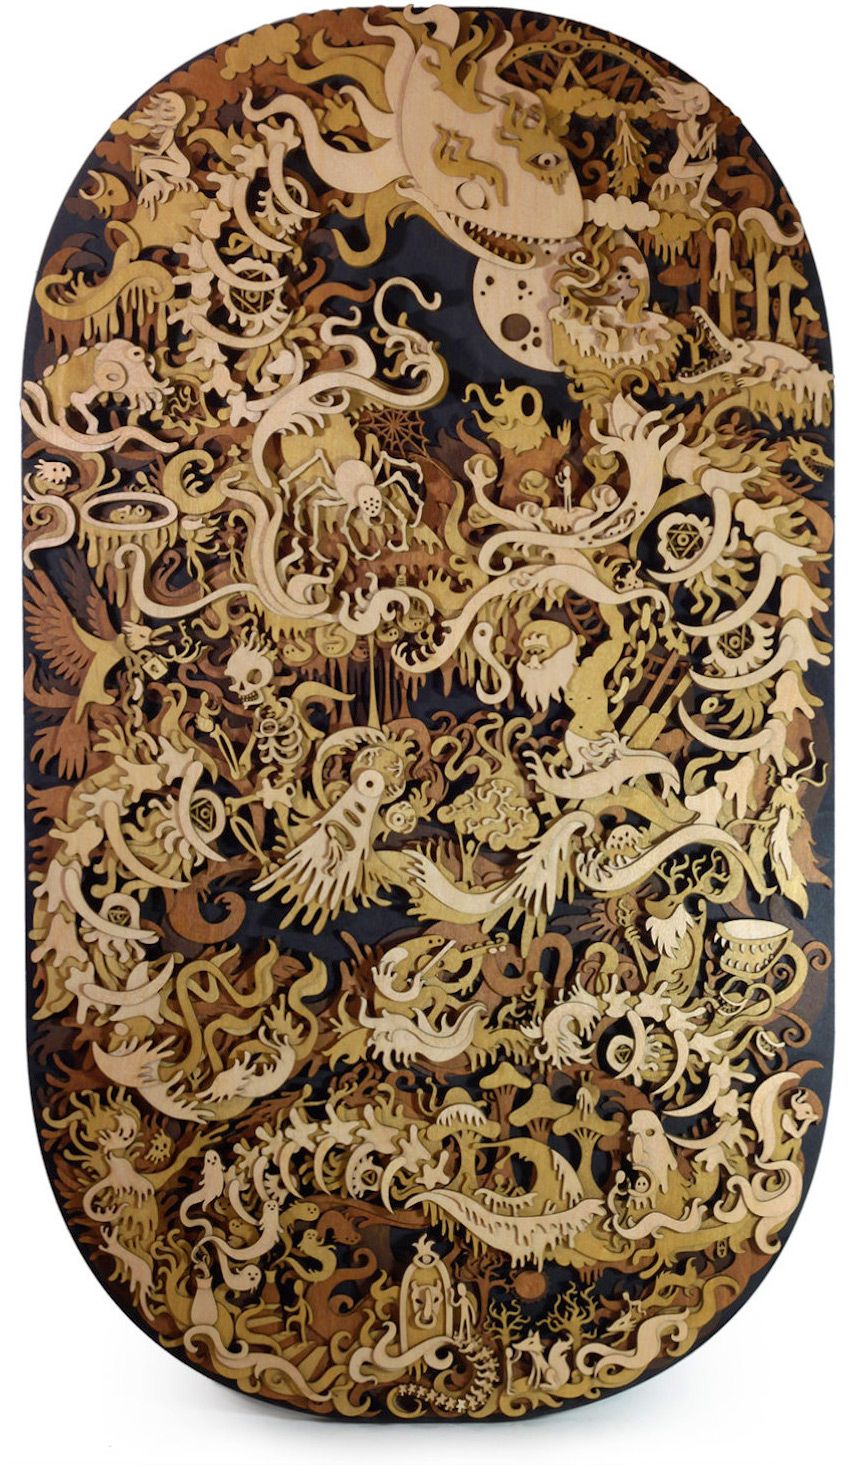 New Laser Cut Wood Illustrationsmartin Tomsky — Colossal Regarding Most Recently Released Intricate Laser Cut Wall Art (View 11 of 20)